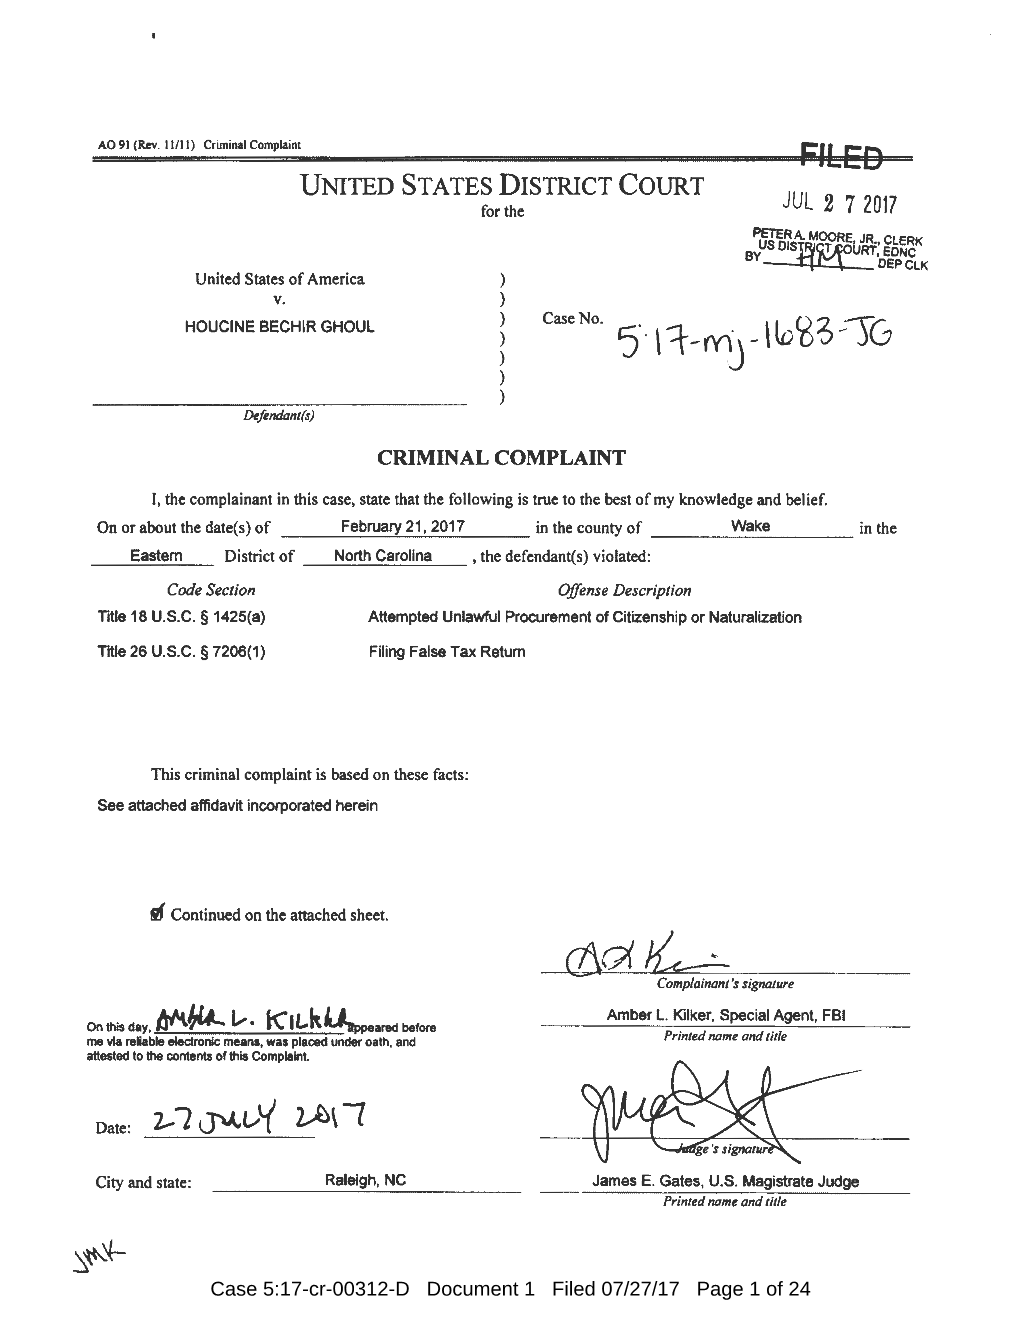 Criminal Complaint FILED UNITED STATES DISTRICT COURT for the JUL 2 7 2017